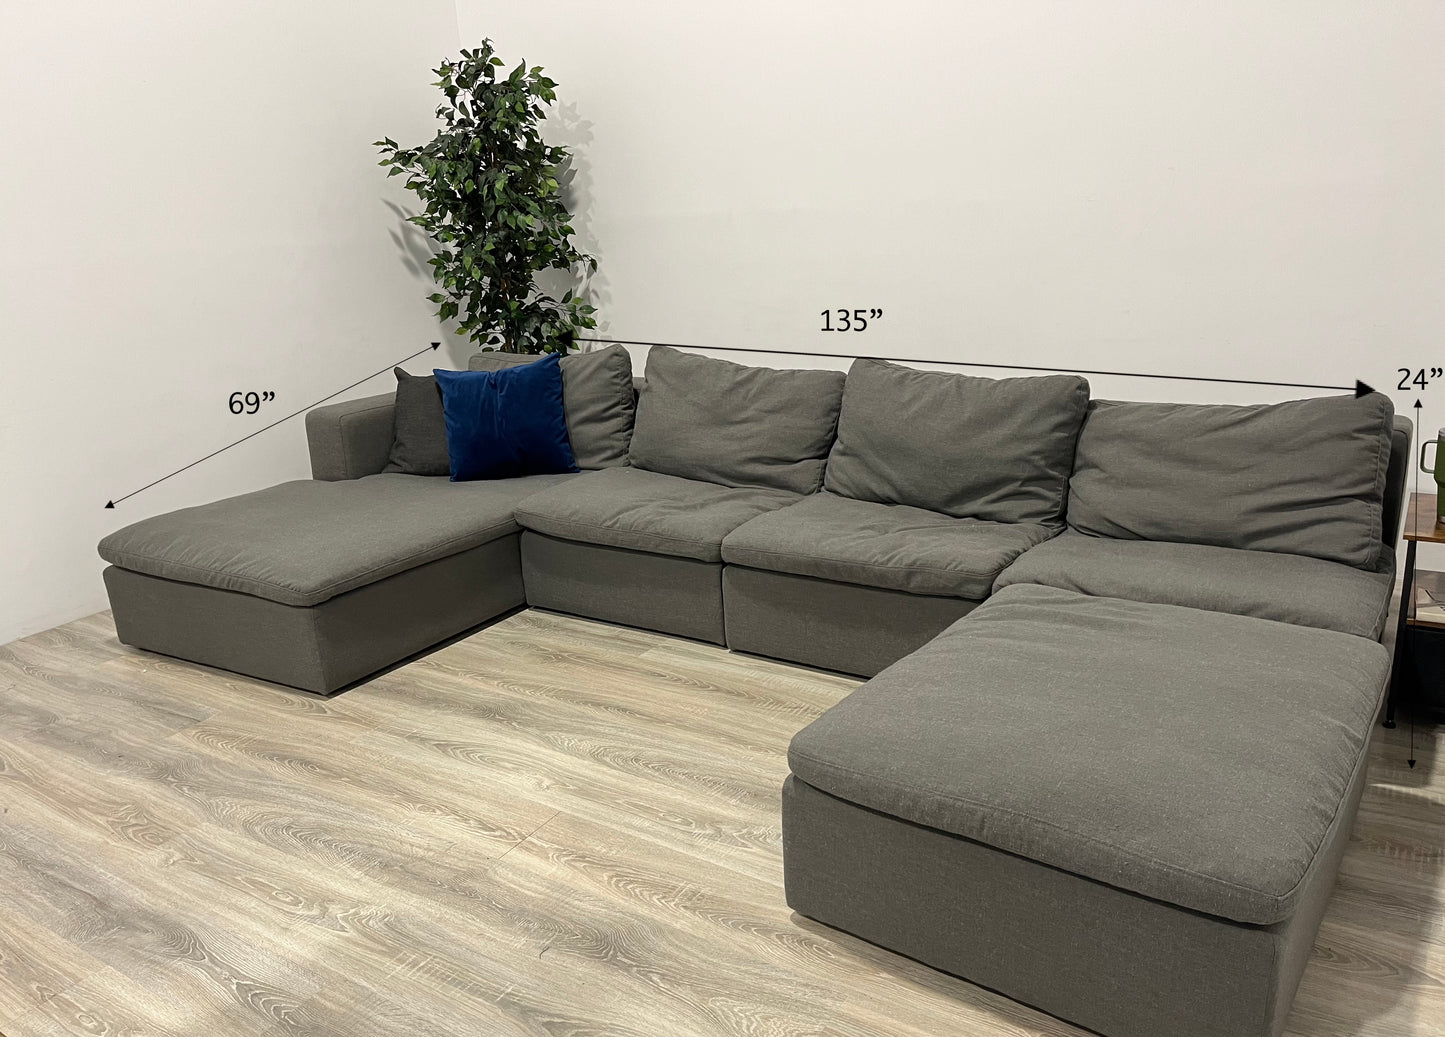 Modular 4-Piece Sectional Couch